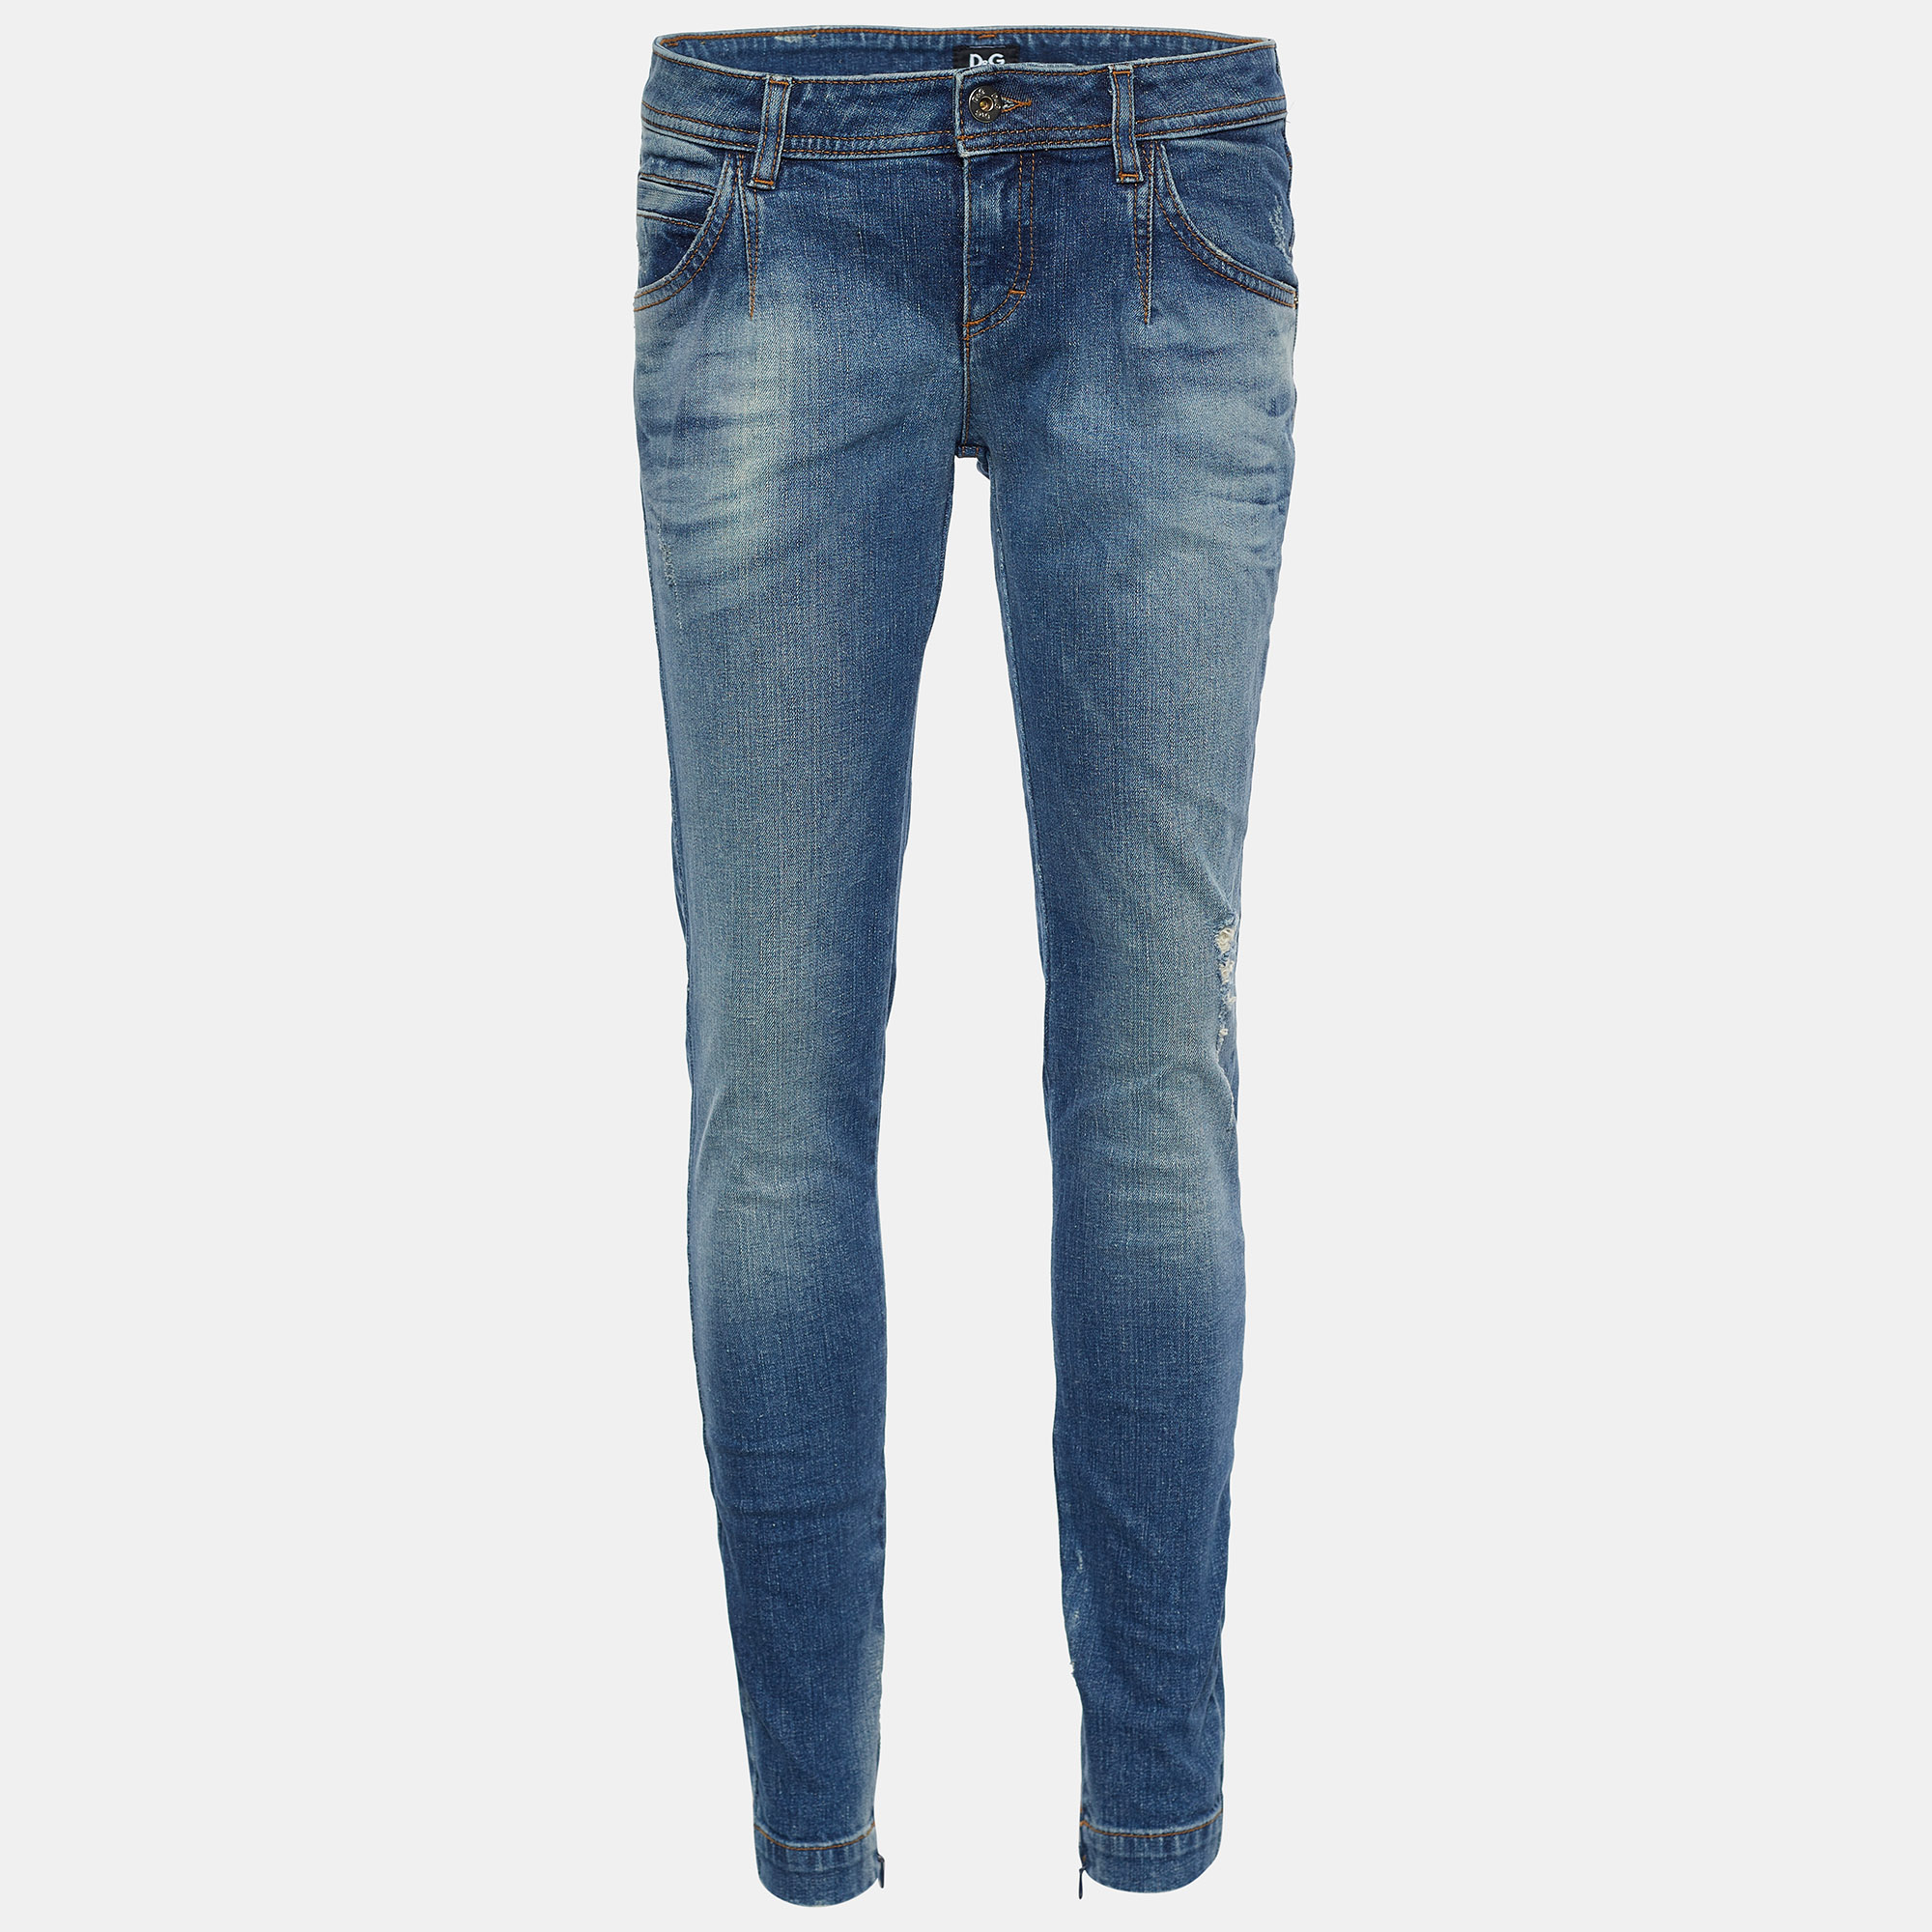 Comfy and classy jeans like these are a closet necessity These jeans from D and G are super stylish and chic. They have been fashioned in indigo distressed denim fabric into a skinny fit silhouette. These jeans are provided with a zipper closure.